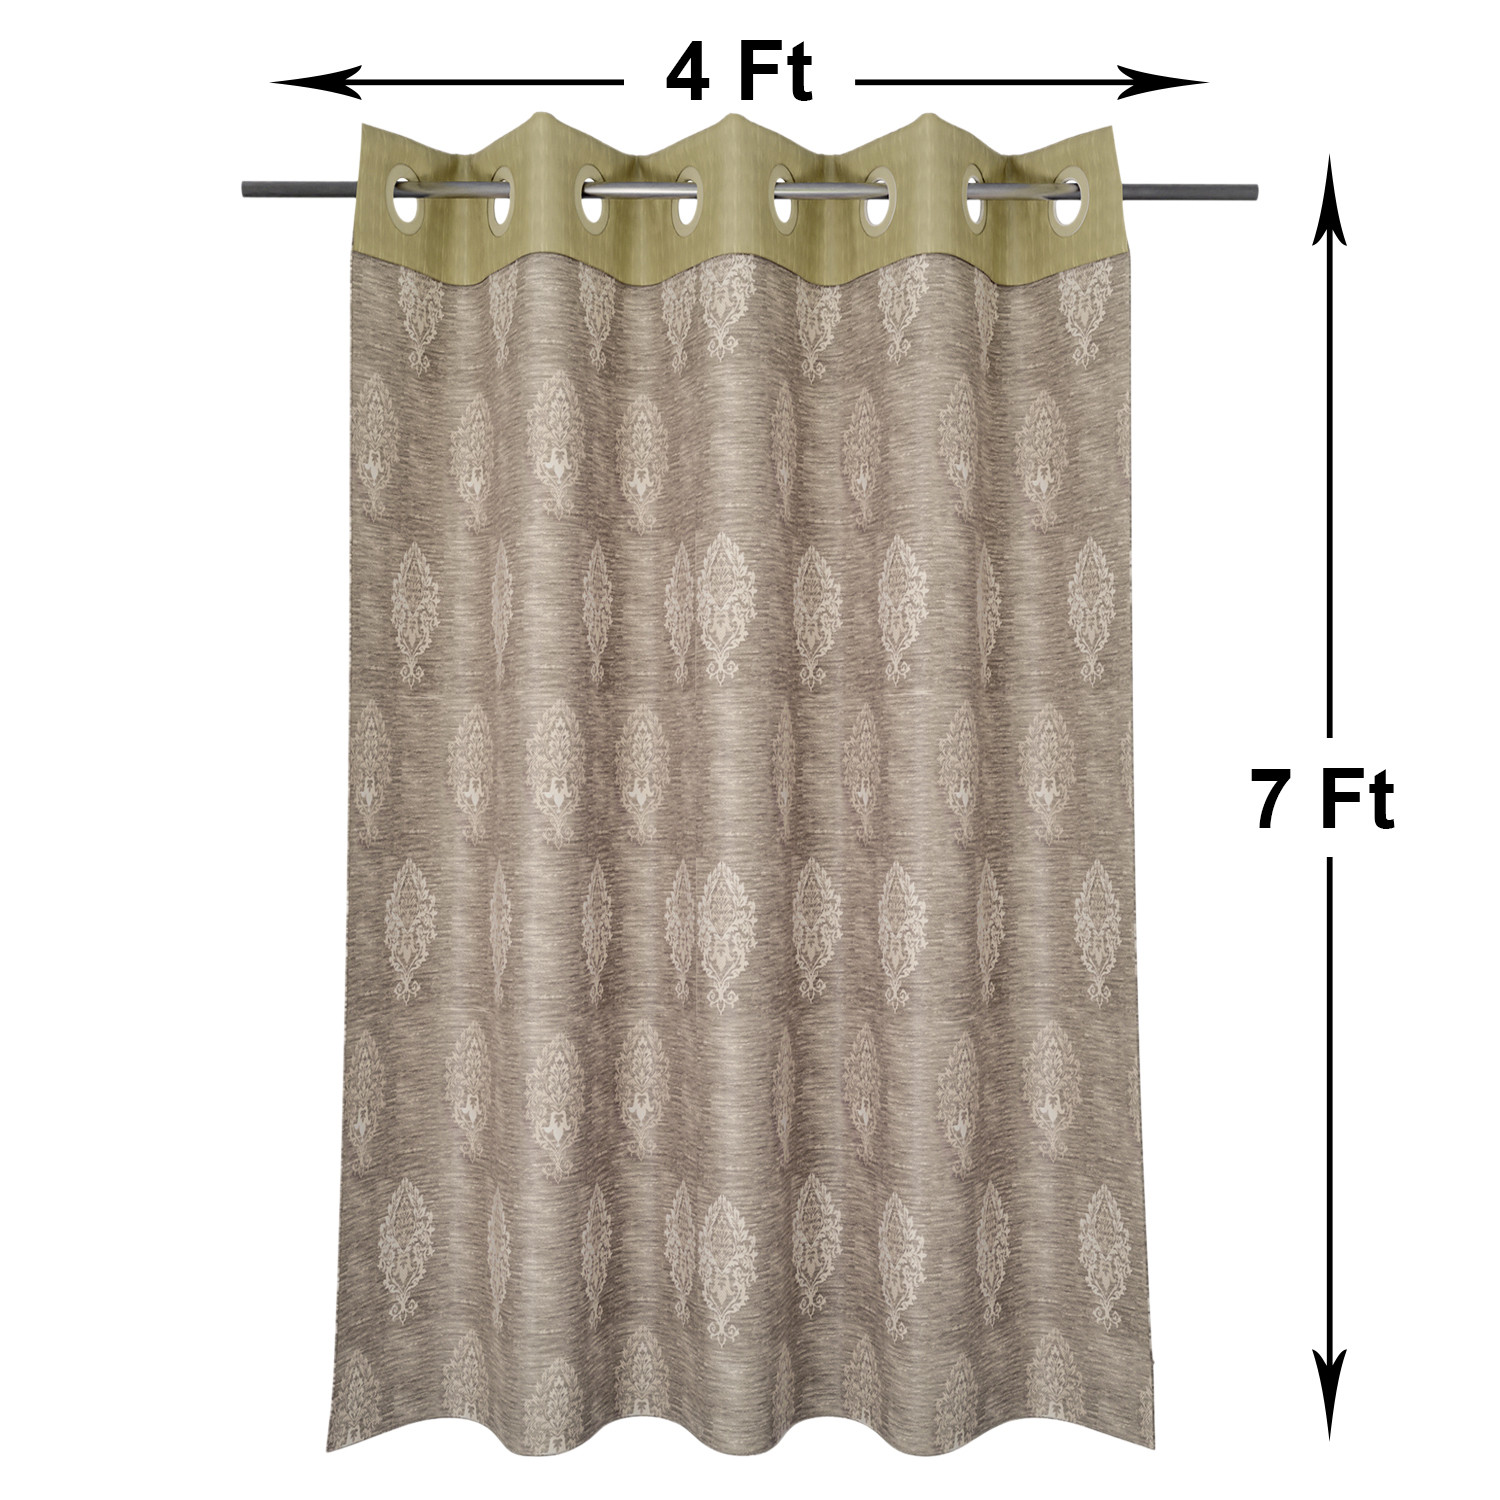 Kuber Industries Faux Silk Decorative 7 Feet Door Curtain | Damask Print Blackout Drapes Curtain With 8 Eyelet For Home & Office (Cream)